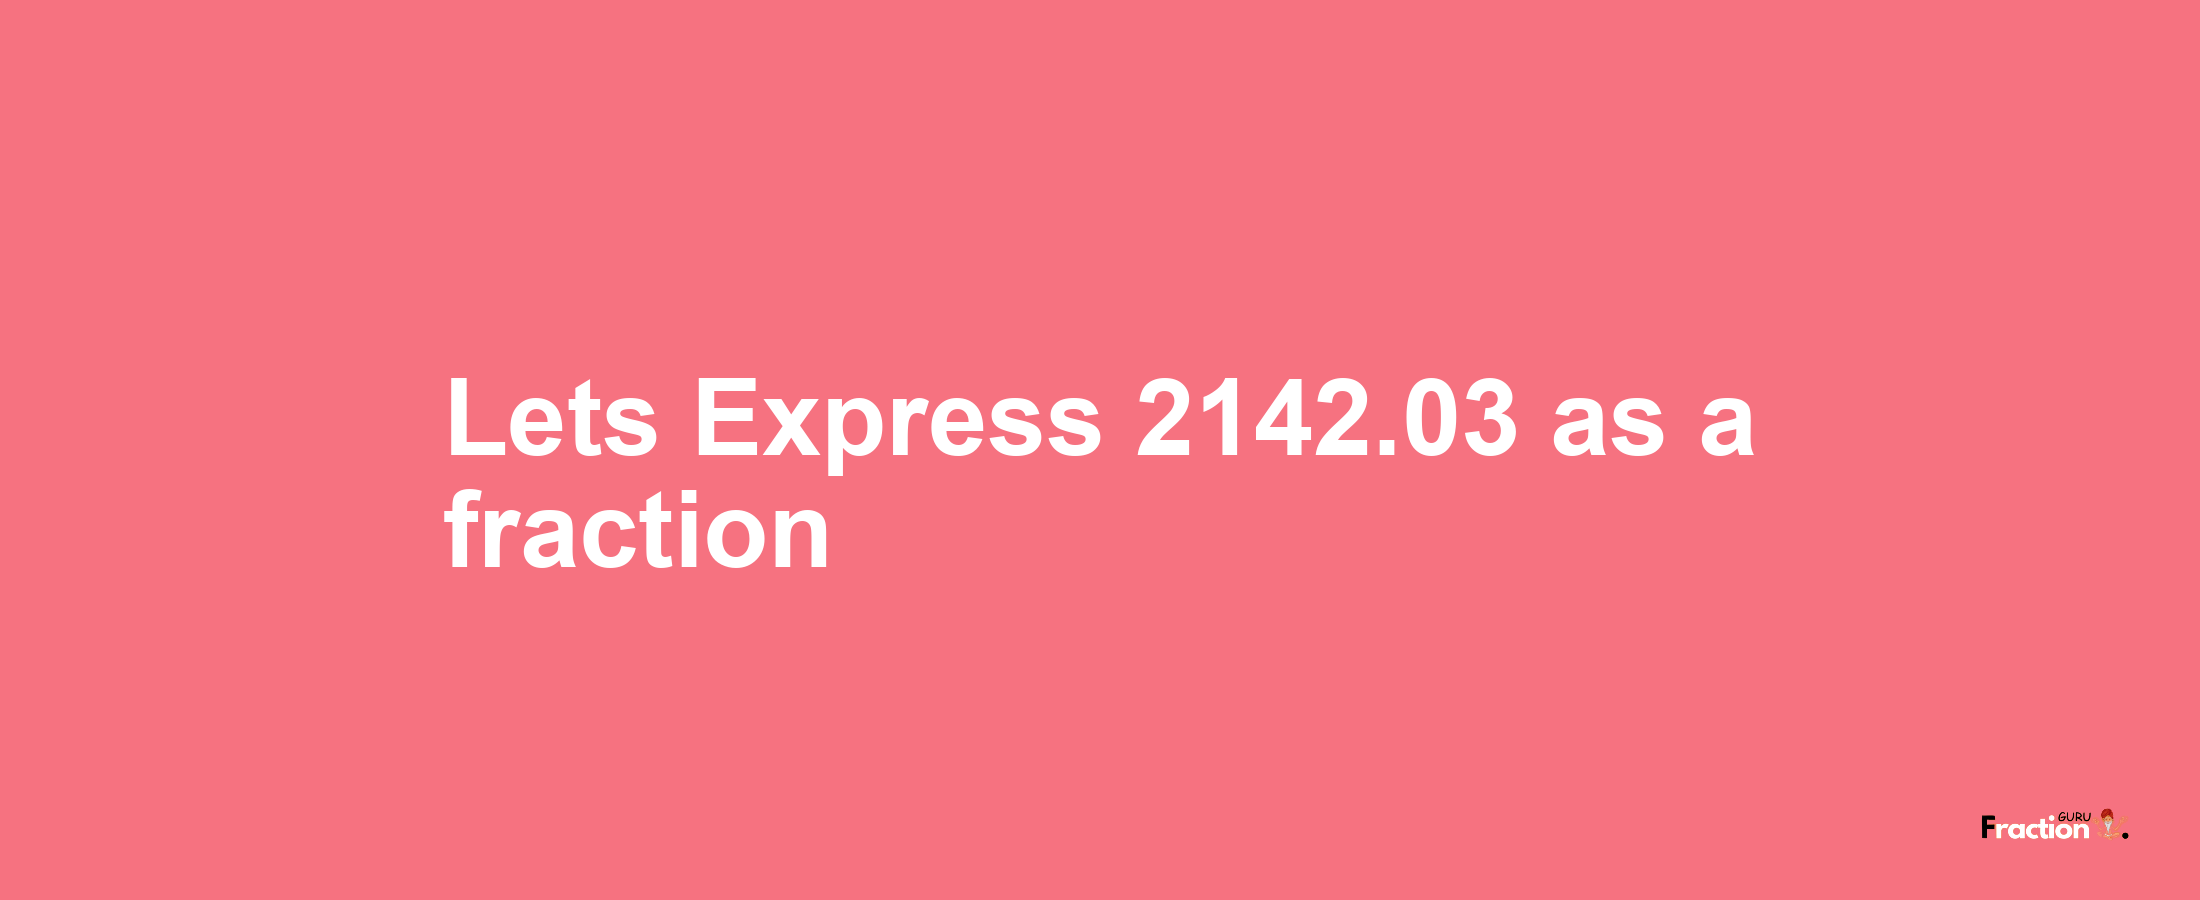 Lets Express 2142.03 as afraction